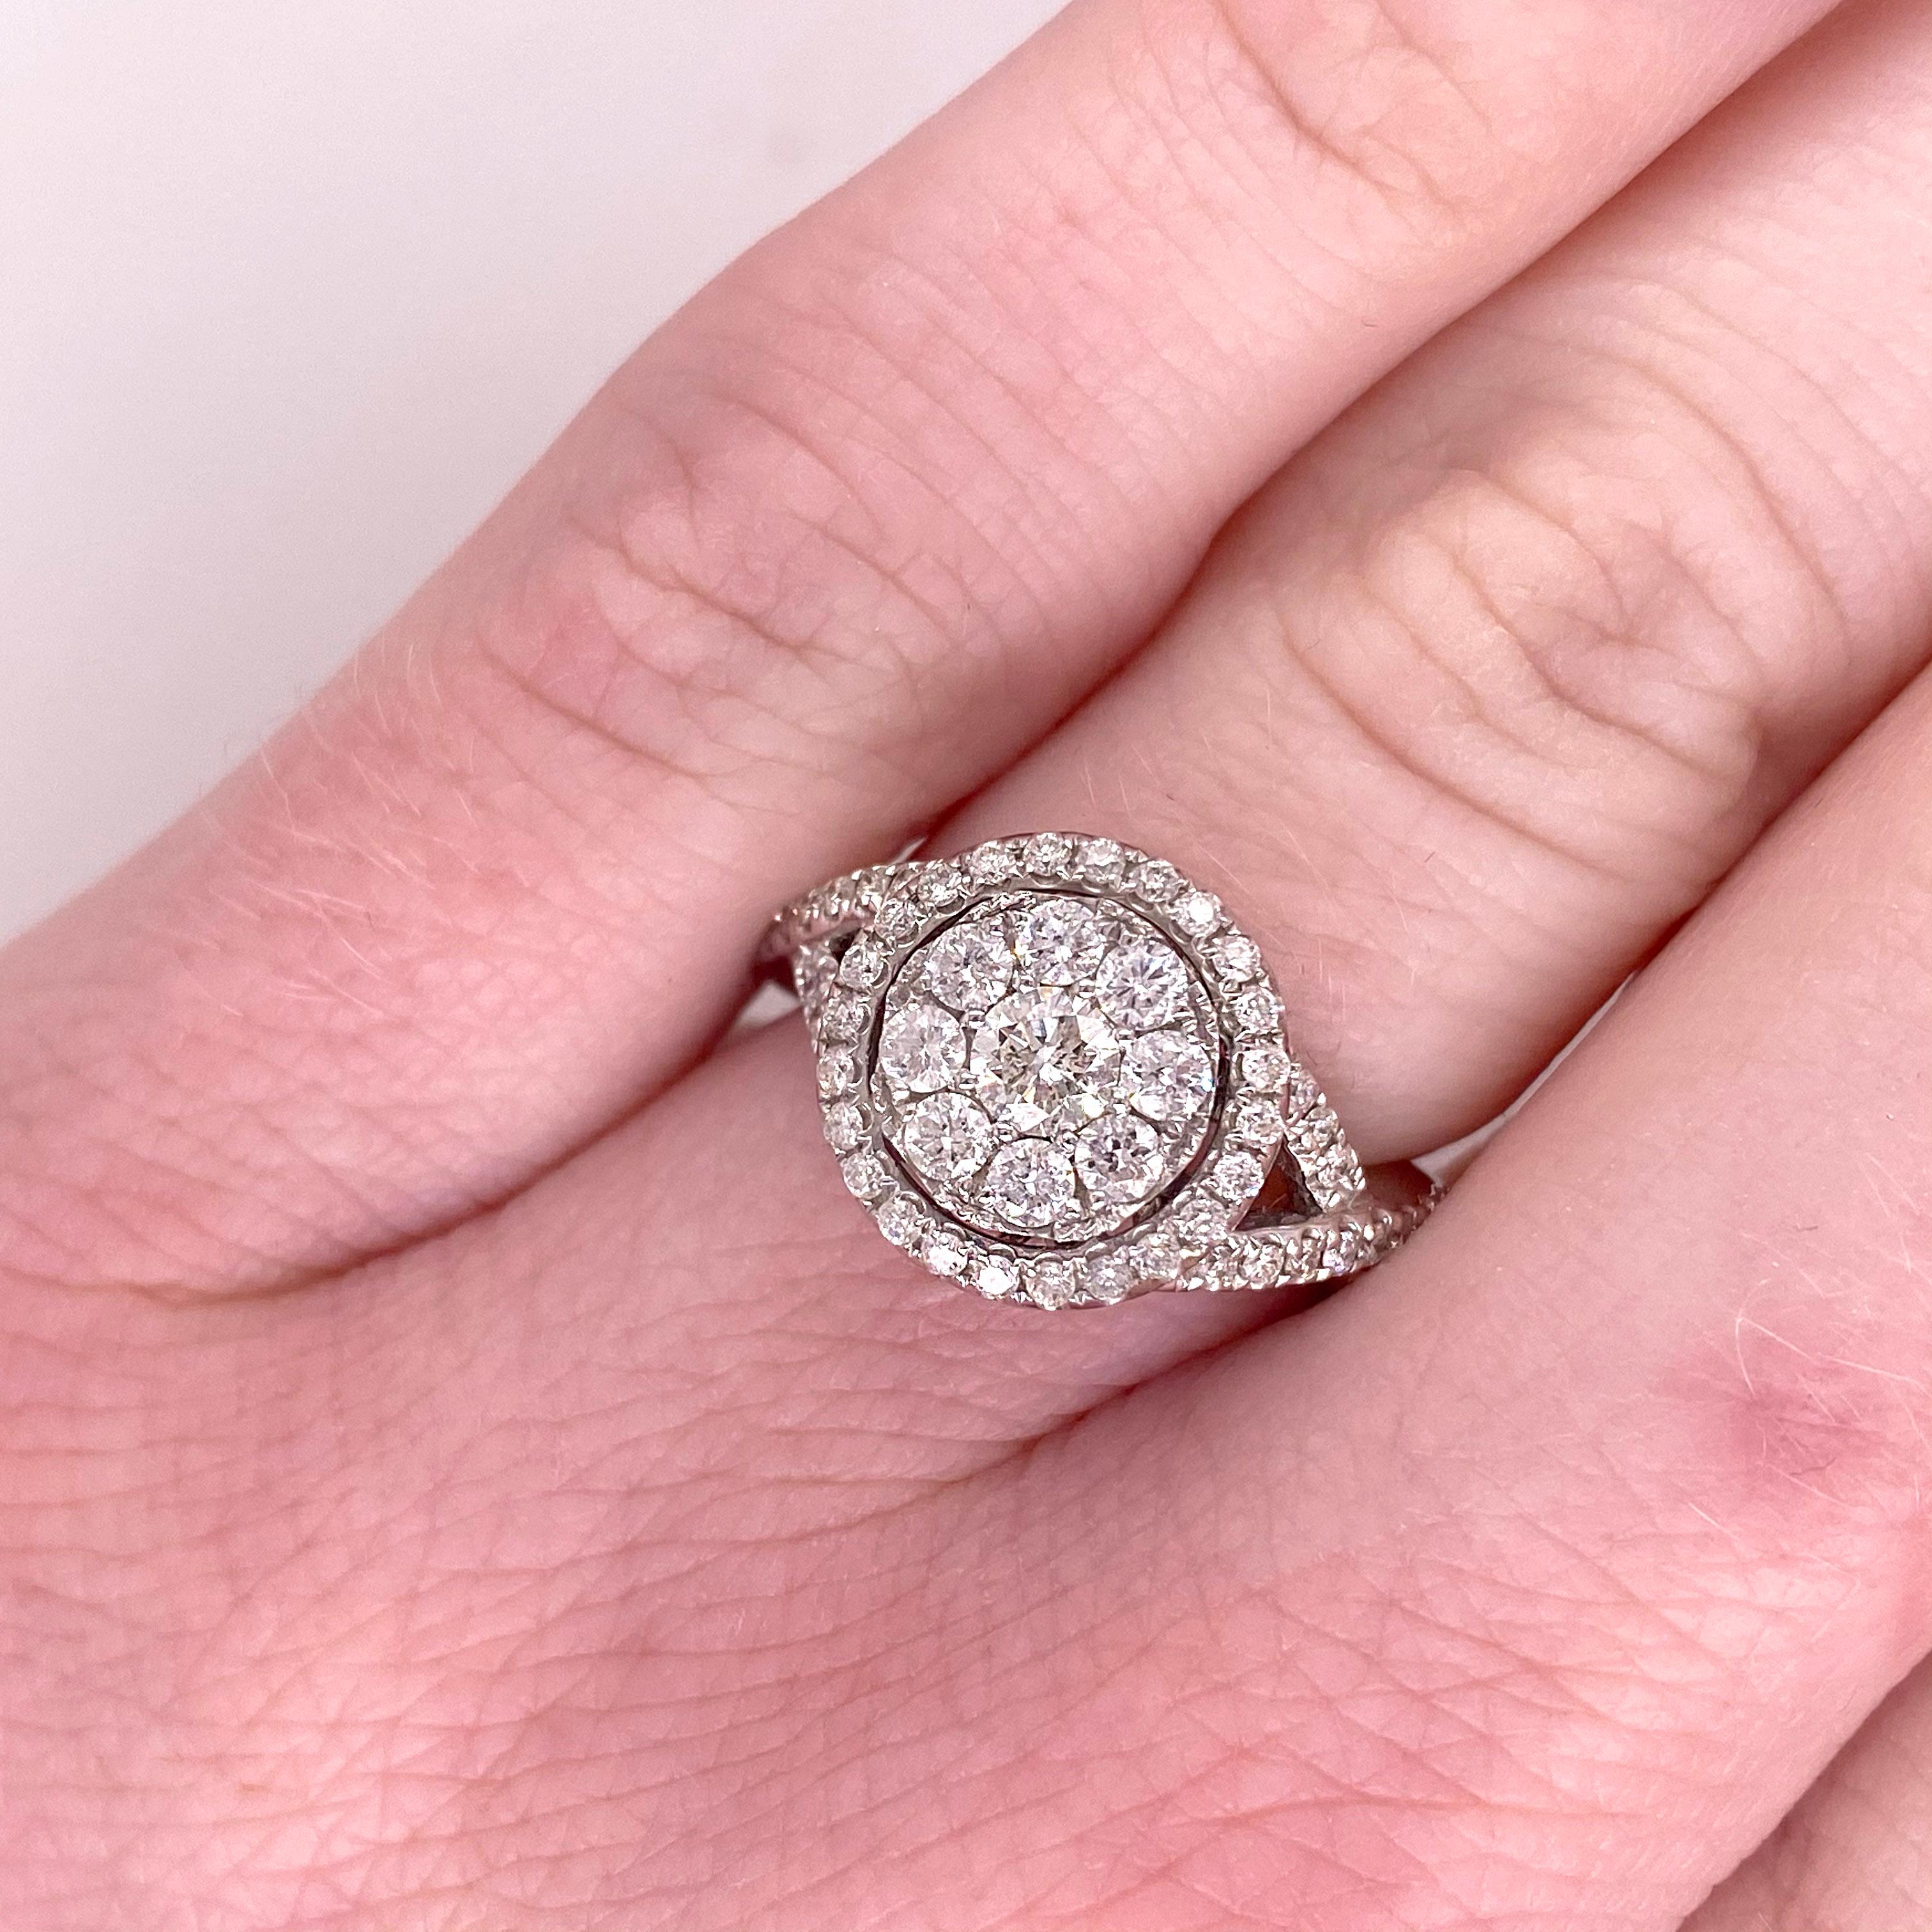 A beautiful 1 carat pave diamond engagement ring. This gorgeous diamond engagement ring has 1.06 carats total diamond weight. With a pave diamond center framed by a diamond halo. The band on this ring is a unique twist/braid design with diamonds